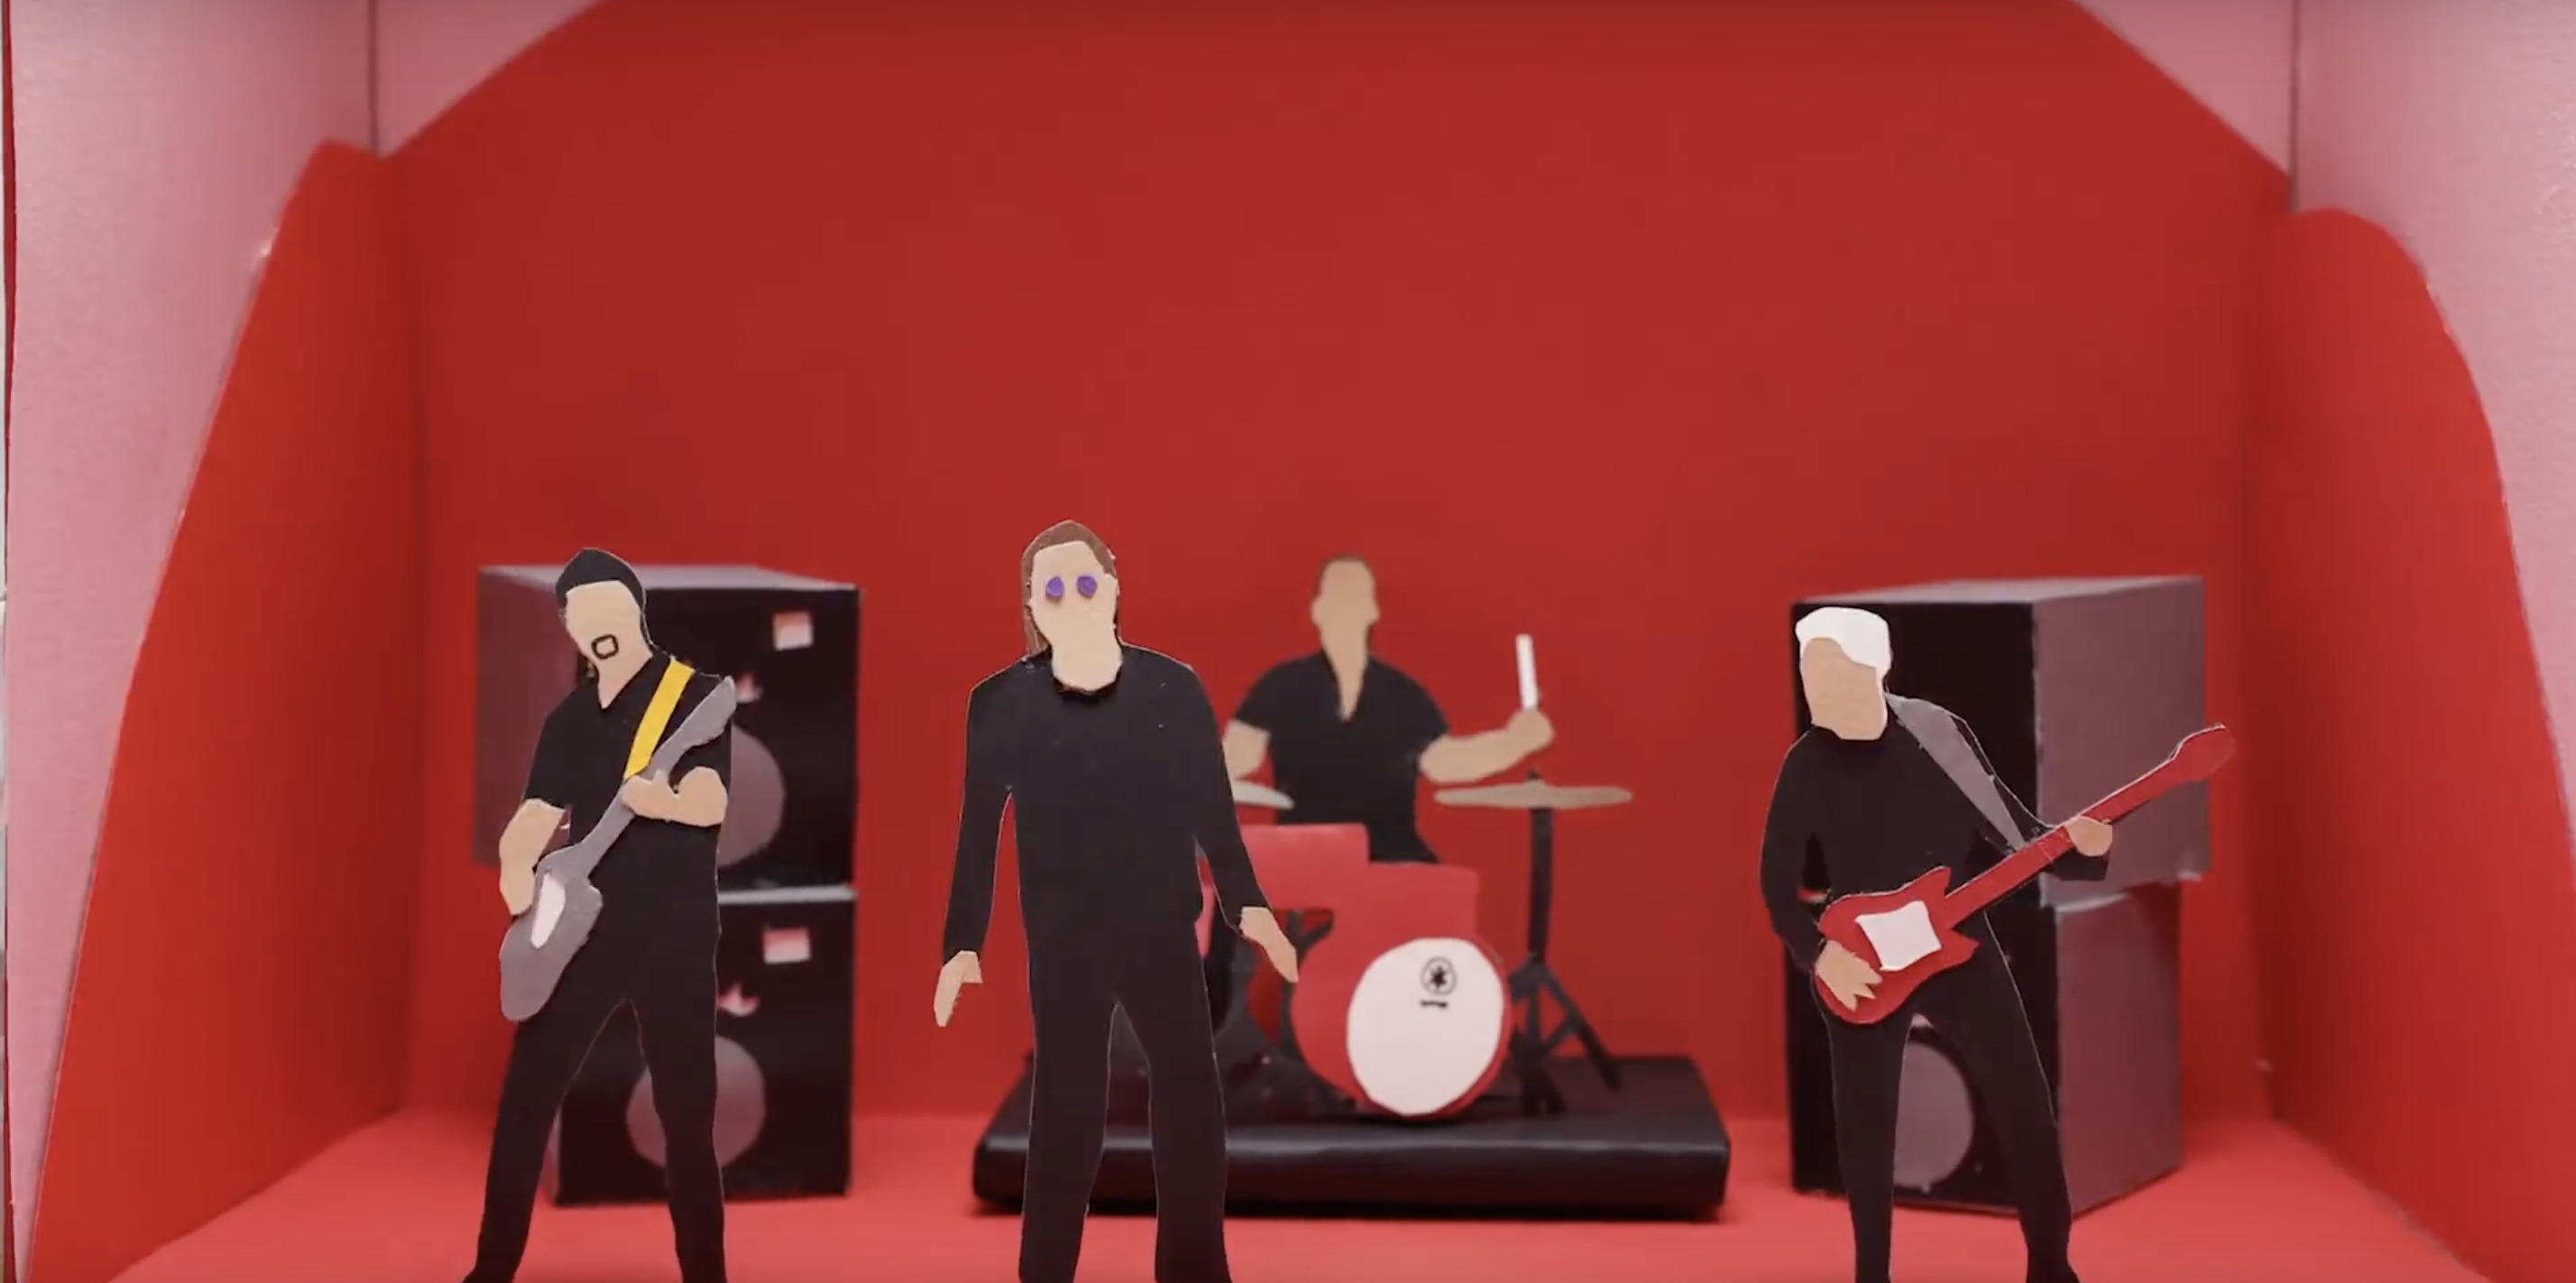 WATCH: Get Out of Your Own Way by U2